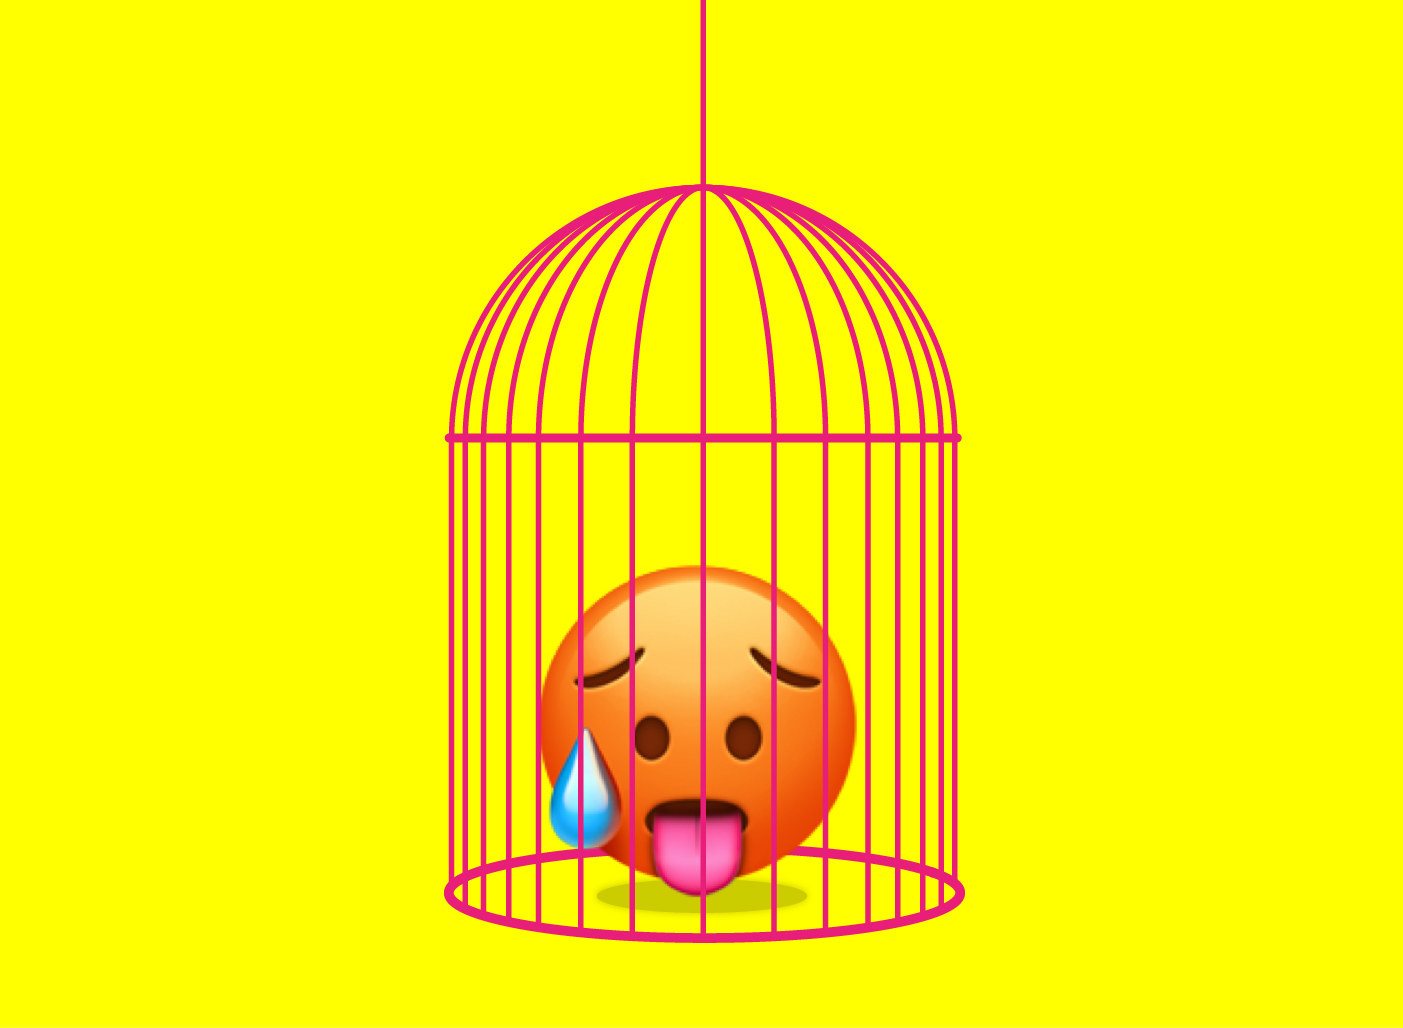 A sweating and panting emoji is trapped inside a bird cage